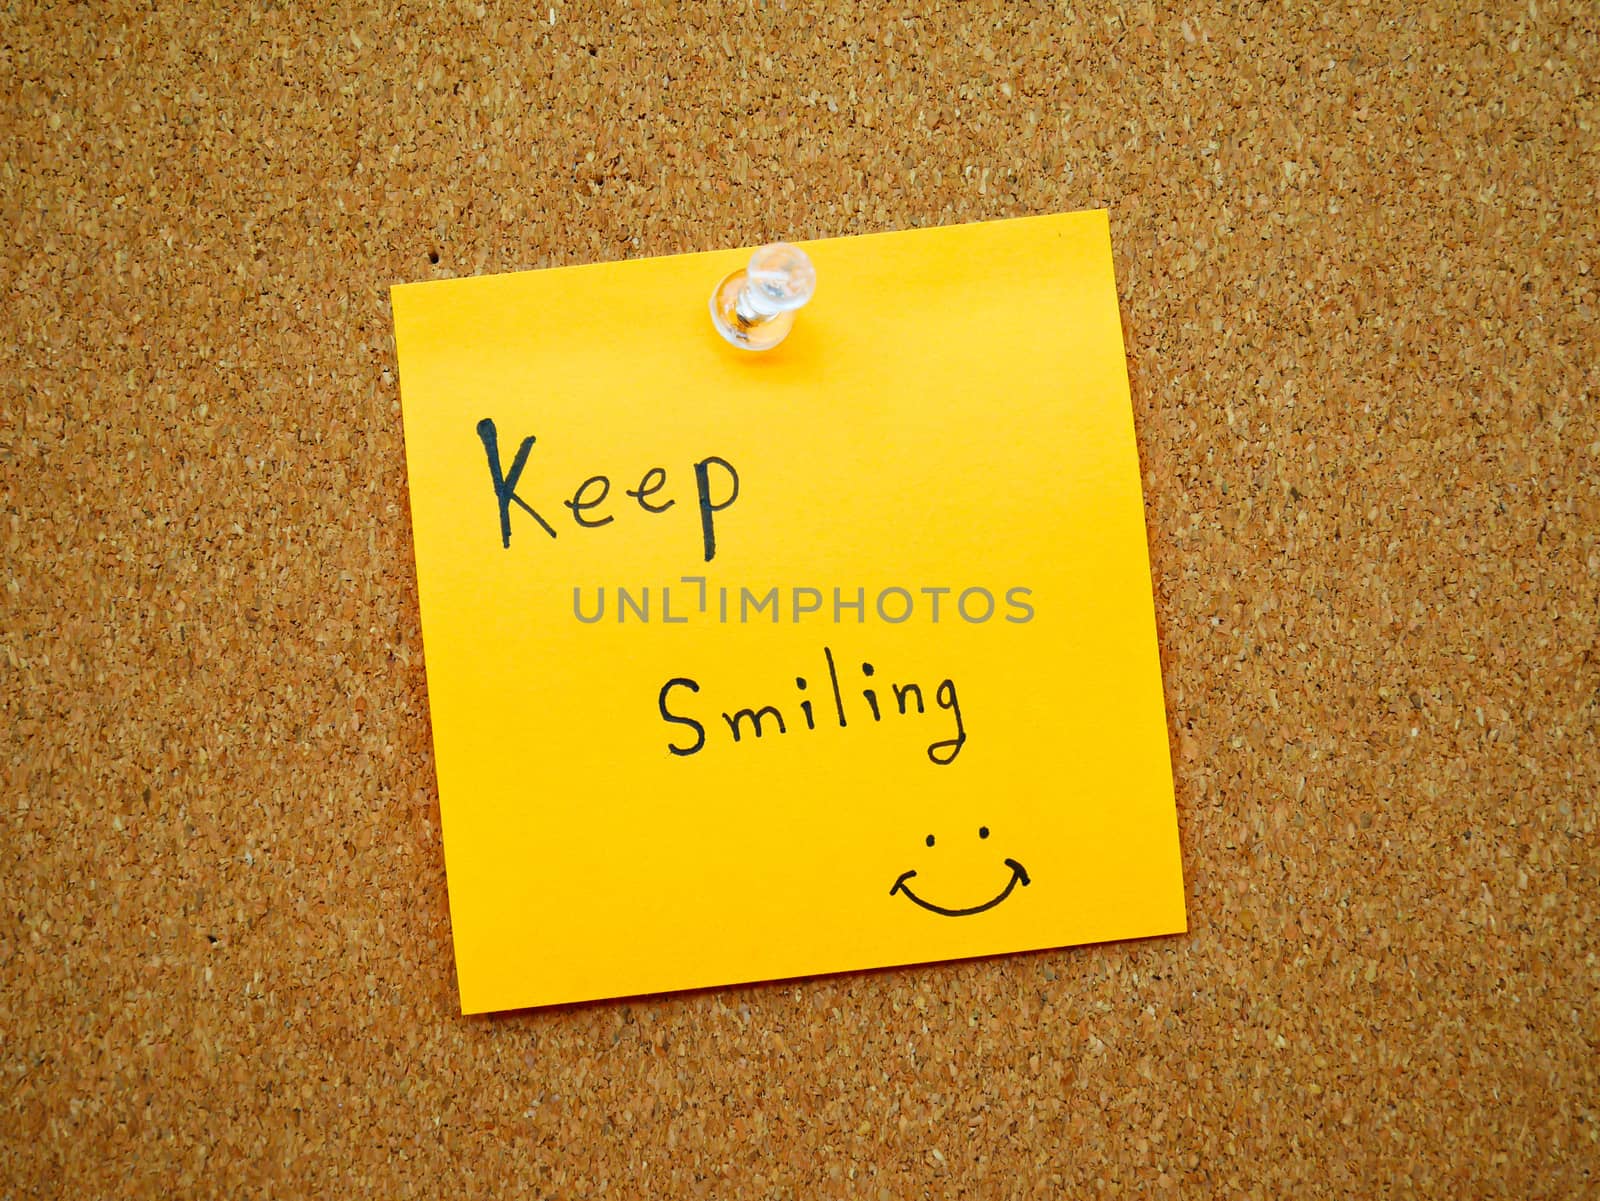 Keep smiling in post note on wooden board 